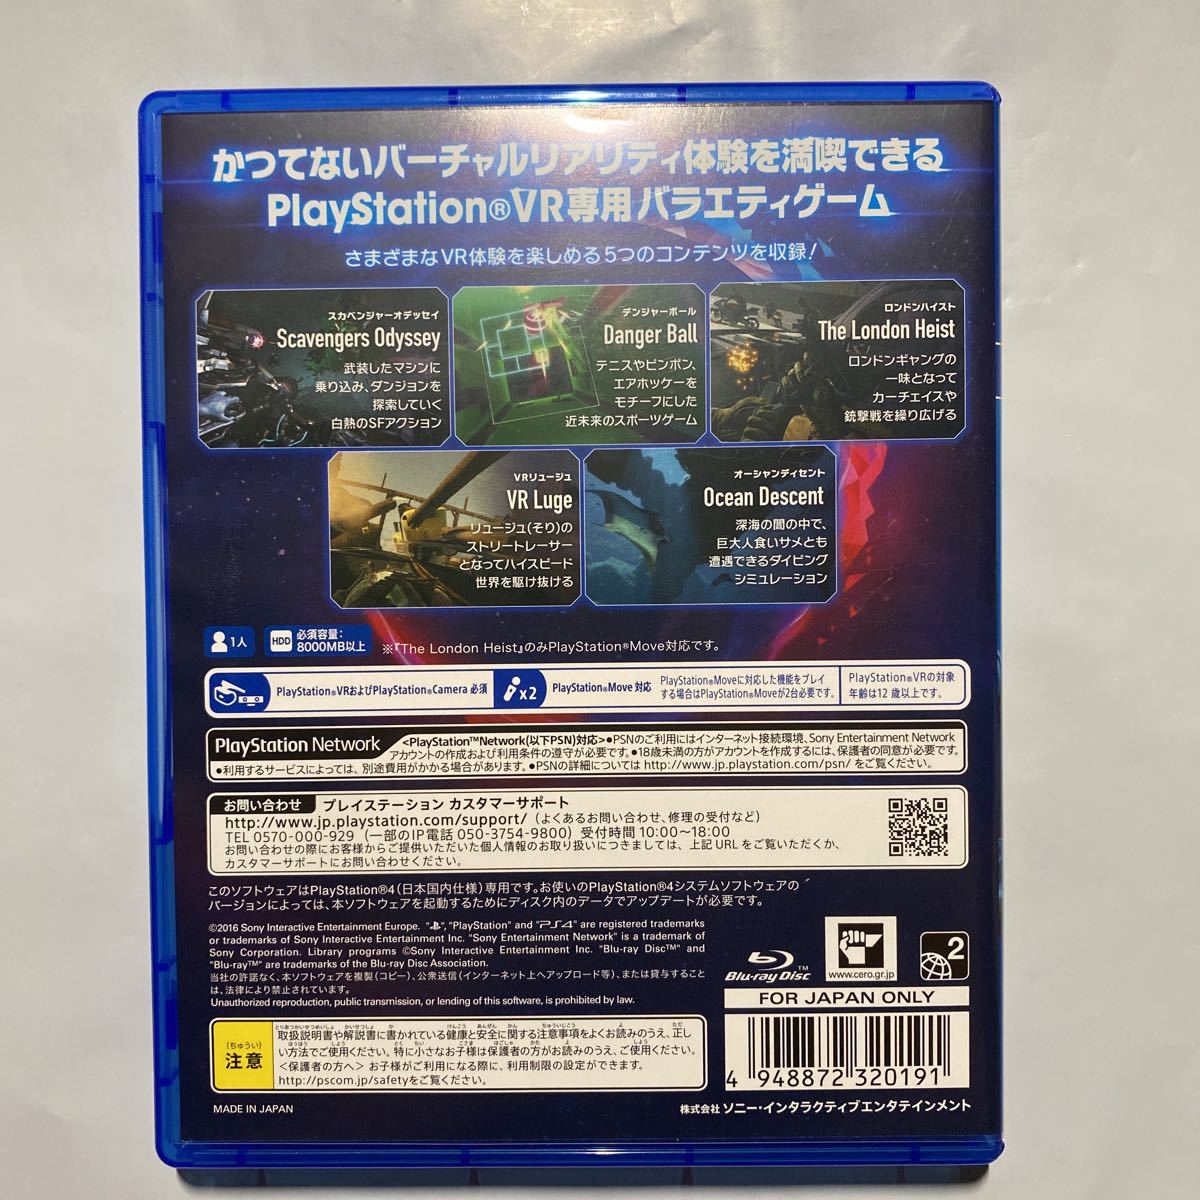 PS4 PlayStation VR WORLDS 的详细信息| 雅虎拍卖代拍| FROM JAPAN